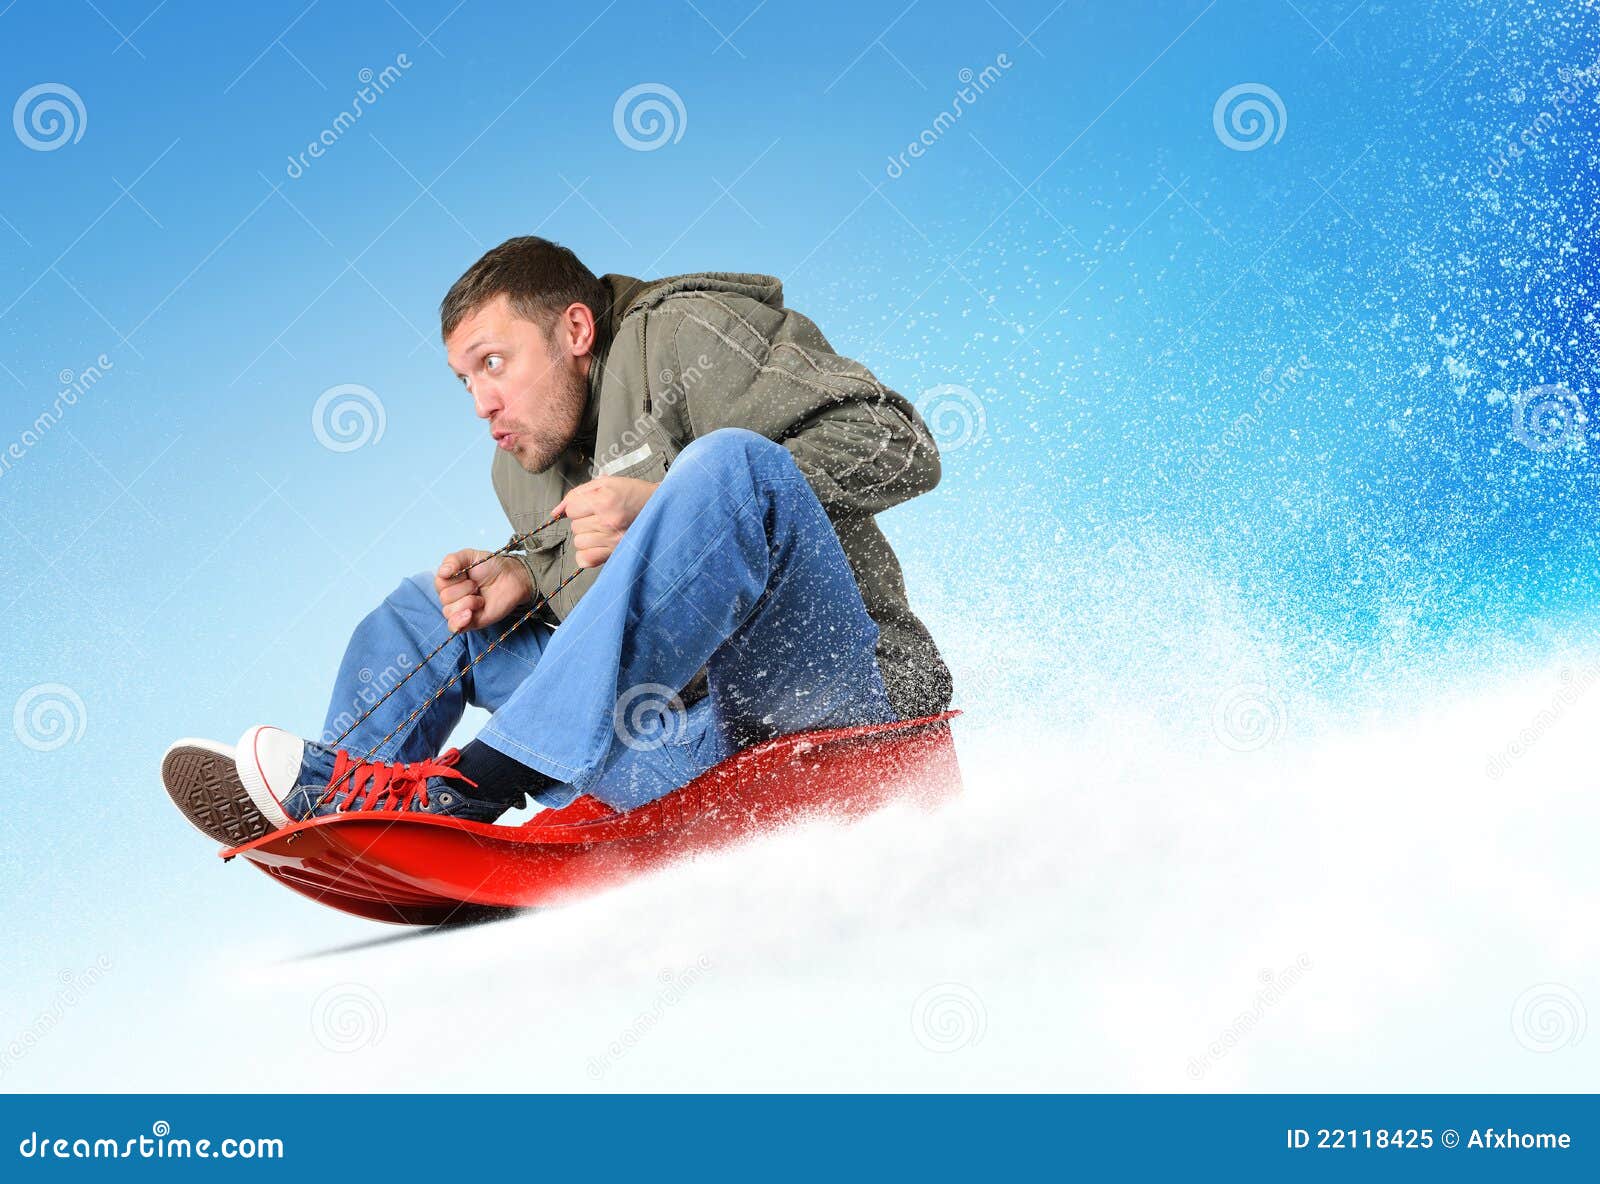 young man flies on sled in the snow